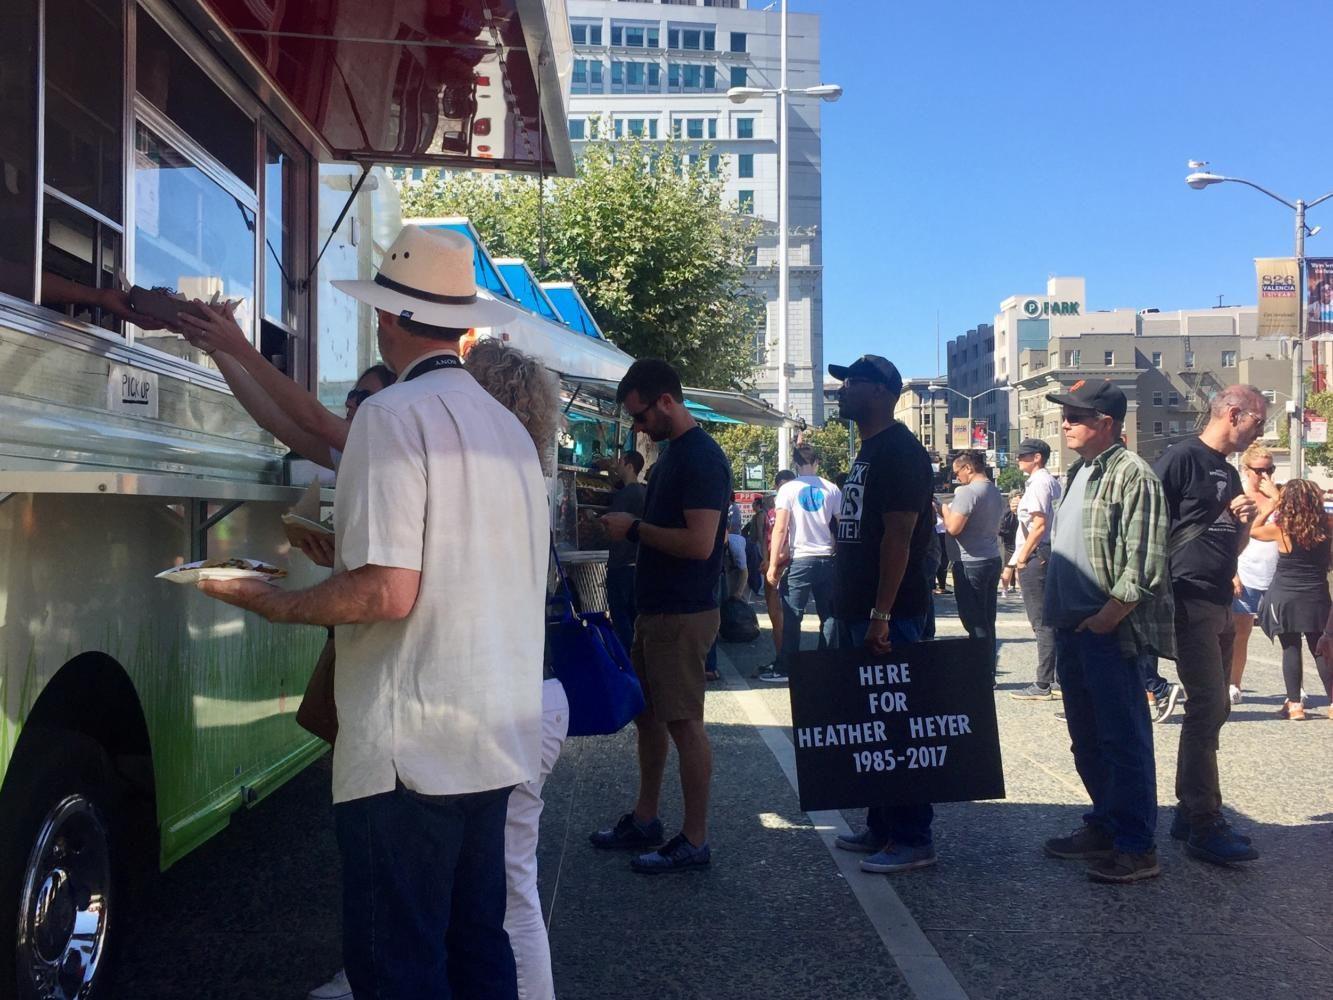 Peaceful protesters stand in line to buy food from a food truck at the rally. One man holds a Here For Heather Heyer sign.